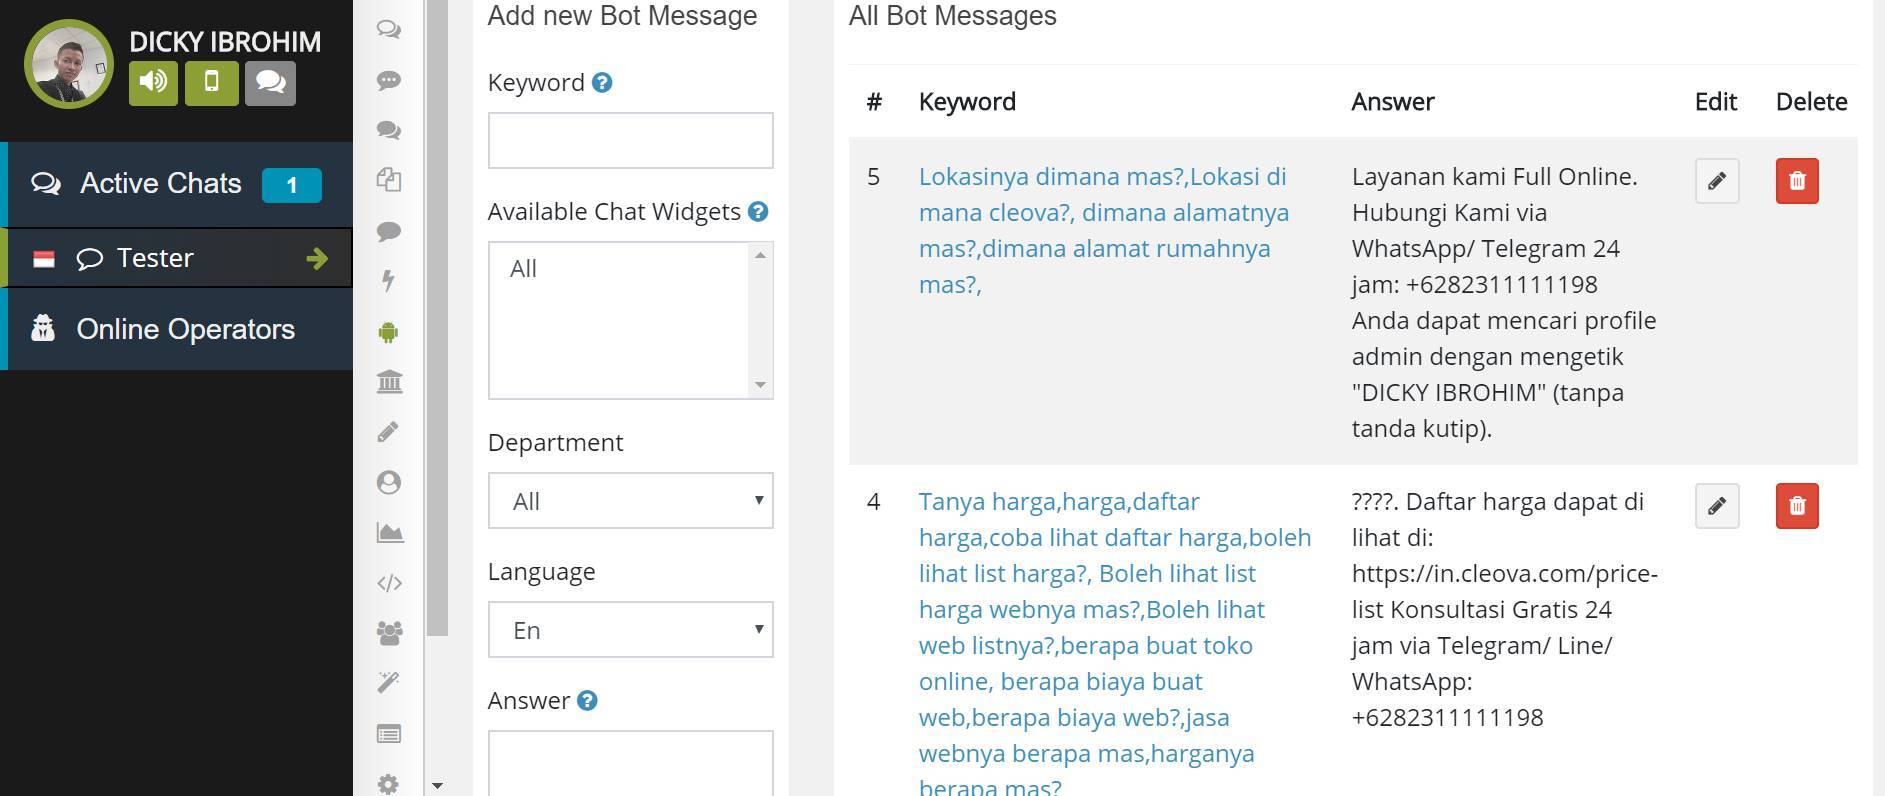 livechat bisnis, livechat unlimited, livechat pro, cs bot asisten, livechat ai, livechat terbaik, livechat terlengkap, livechat standalone, cara membuat live chat, livechat bot, answer and status